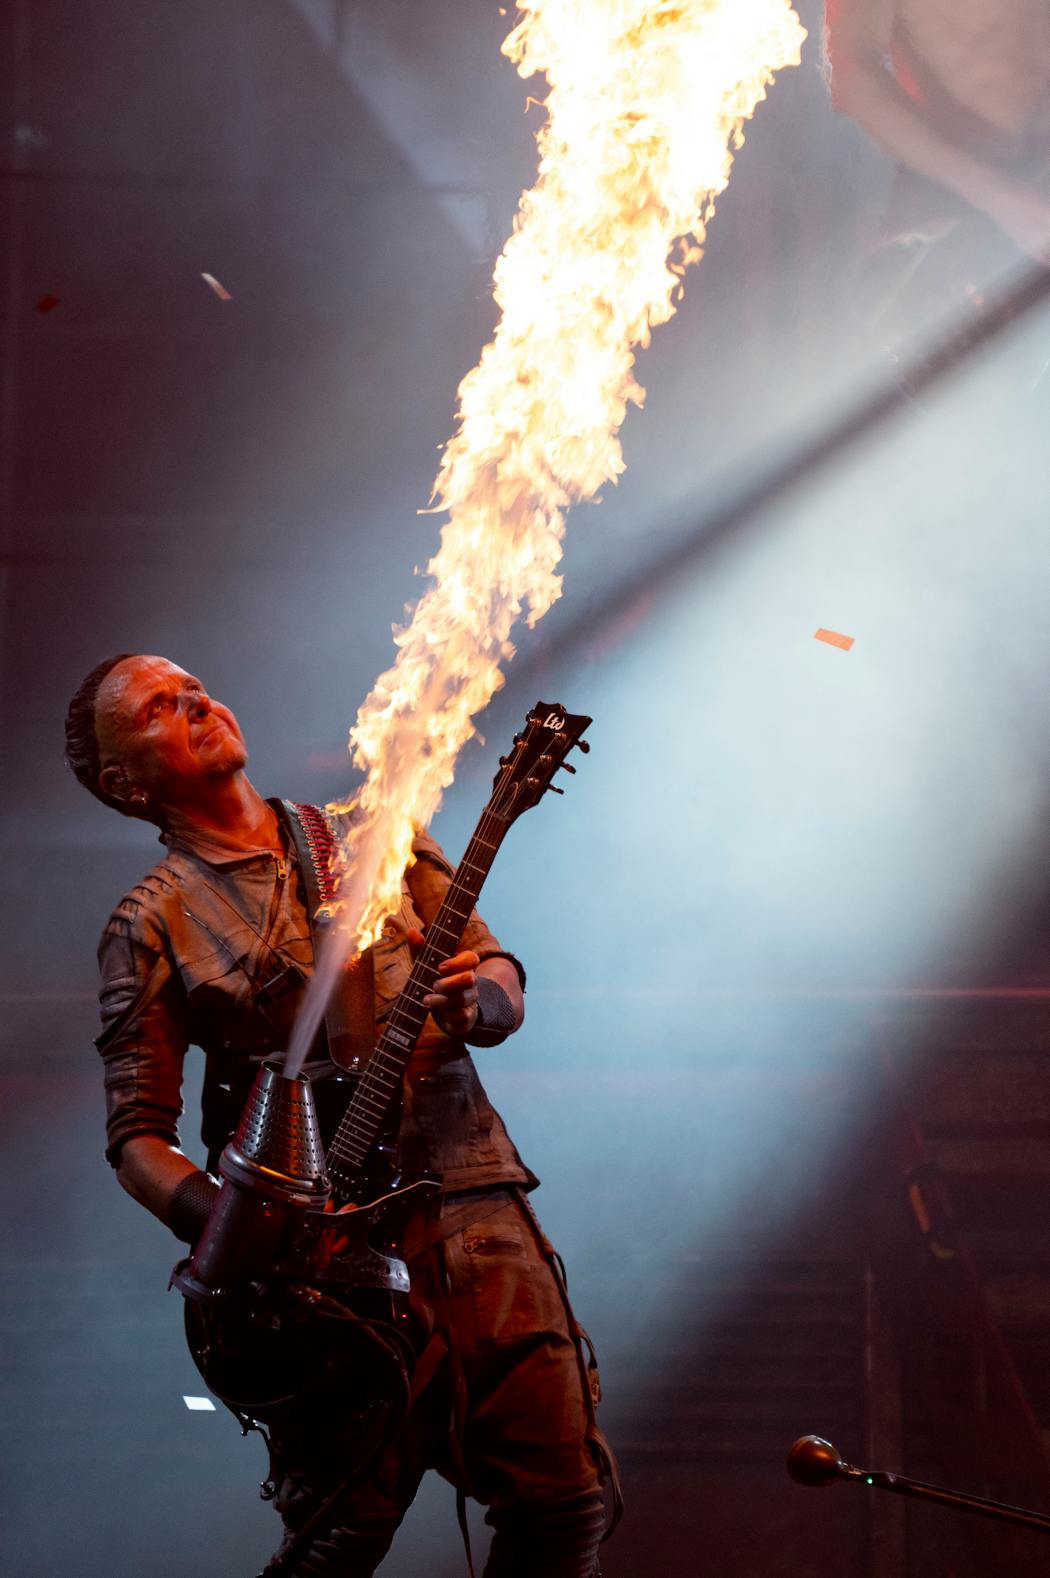 Wait for Rammstein adds to incendiary stadium concert in Minneapolis